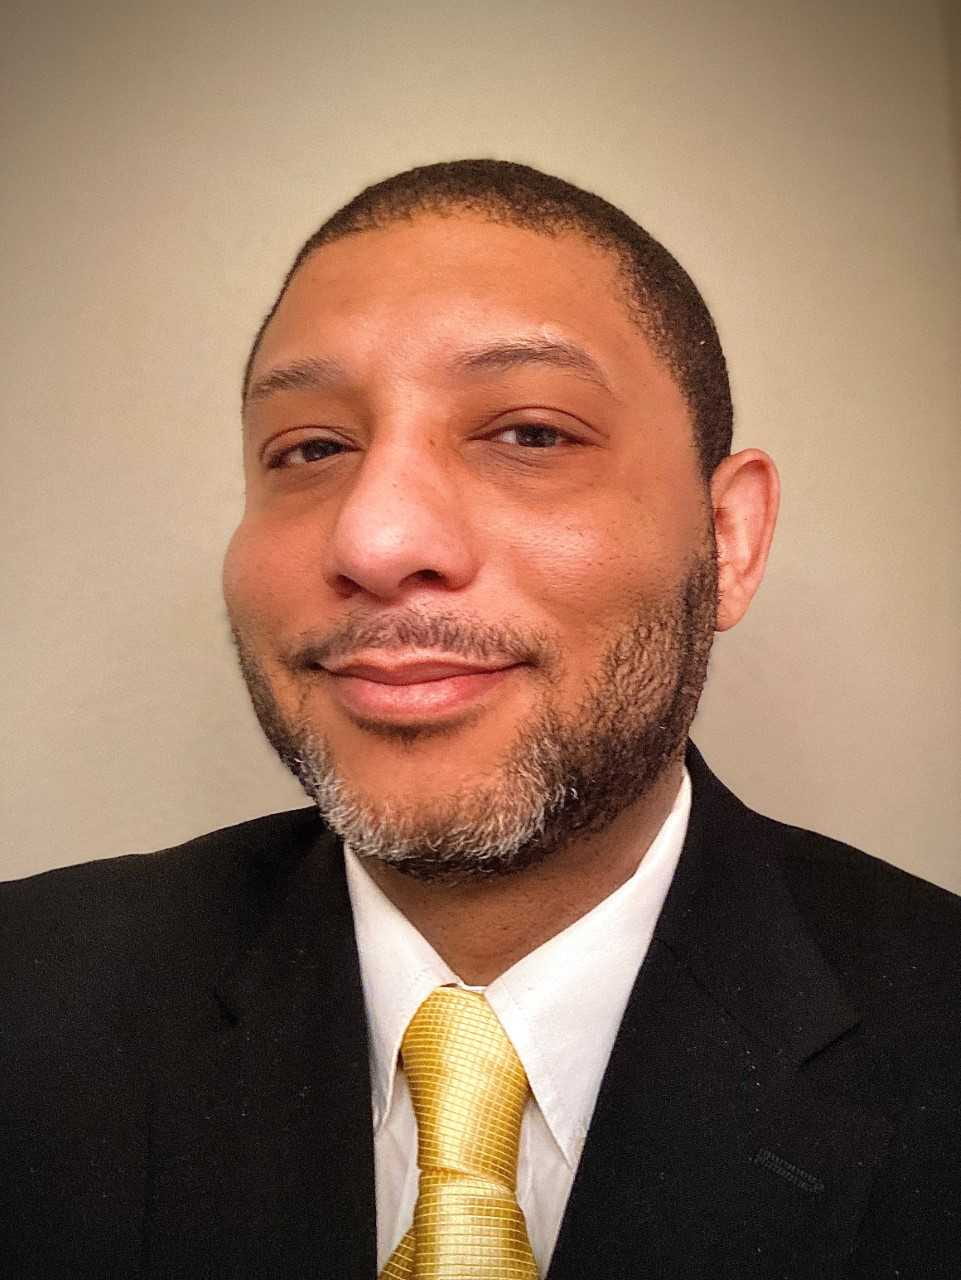 Photo of Rahni B. Kennedy; headshot black man in a suit with a gold tie